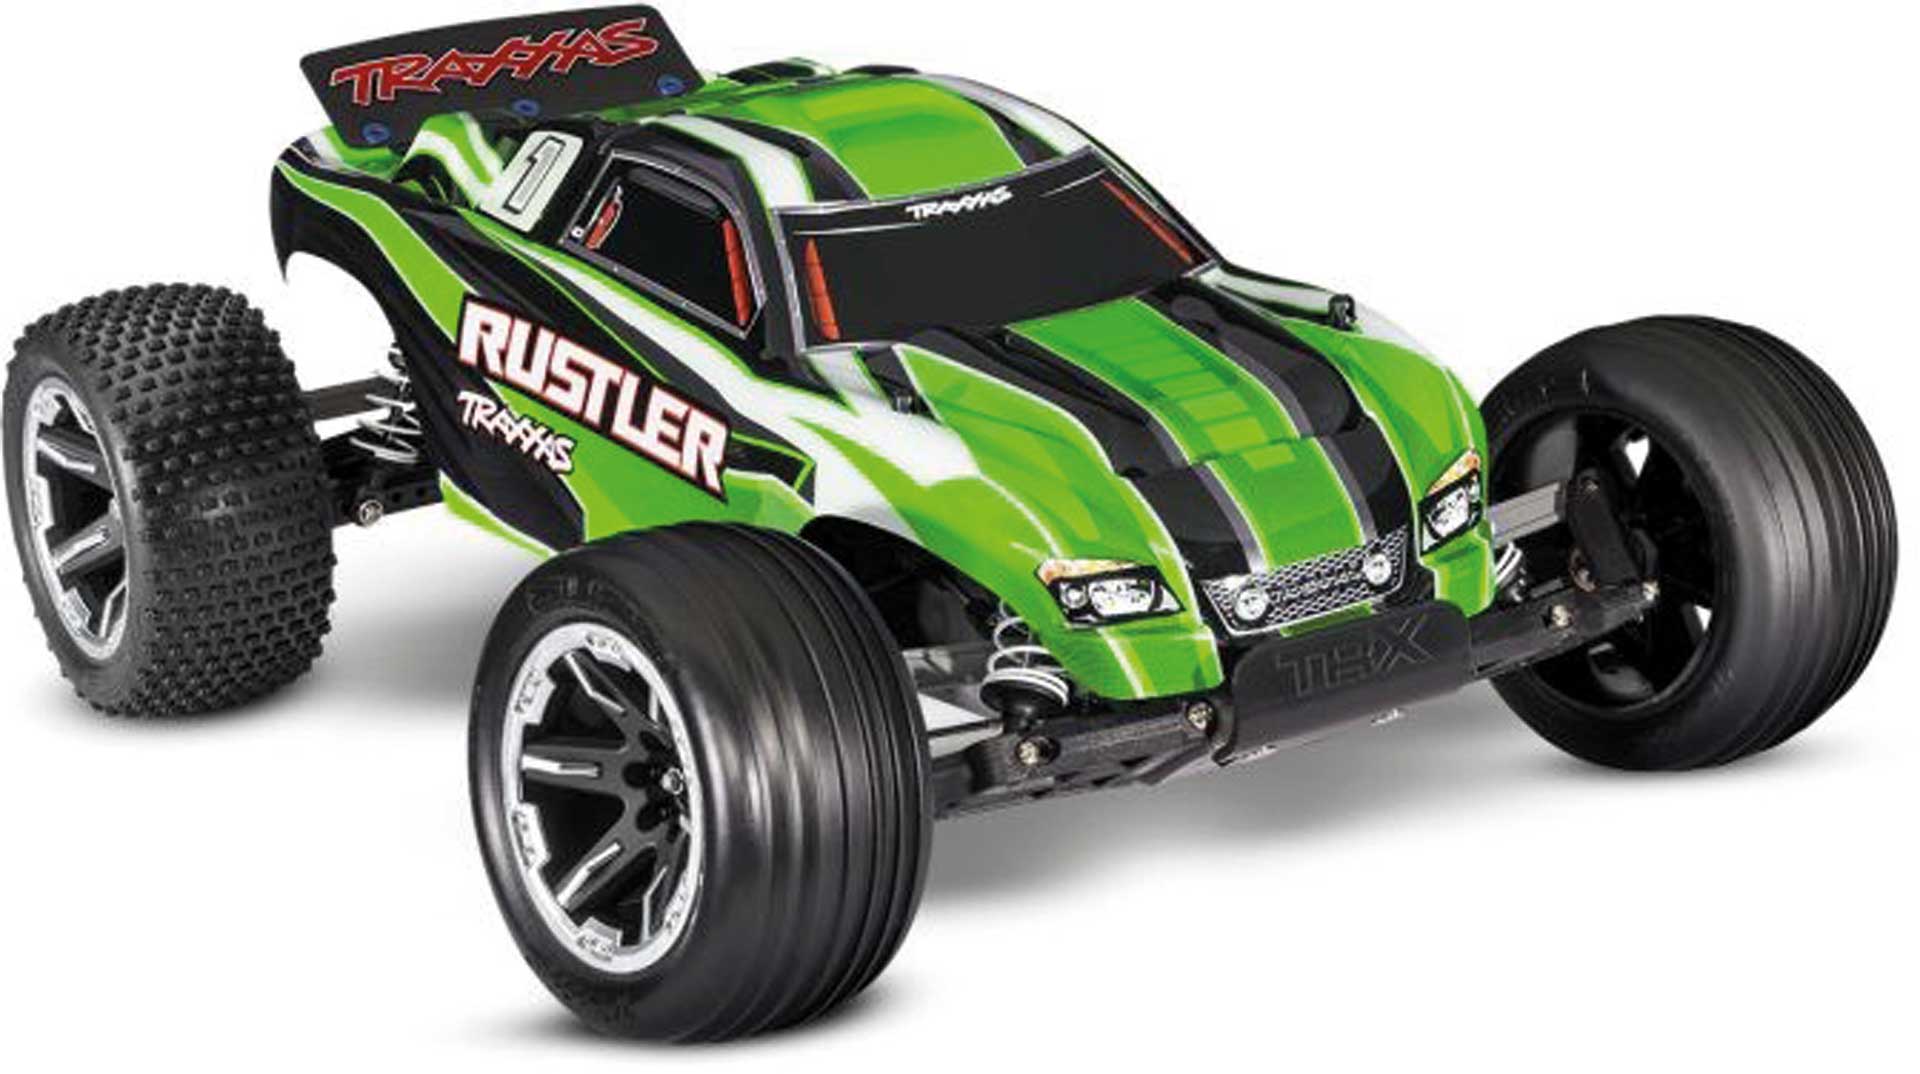 TRAXXAS RUSTLER GREEN 1/10 2WD STADIUM-TRUCK RTR BRUSHED, WITH BATTERY AND 4AMP USB-C CHARGER